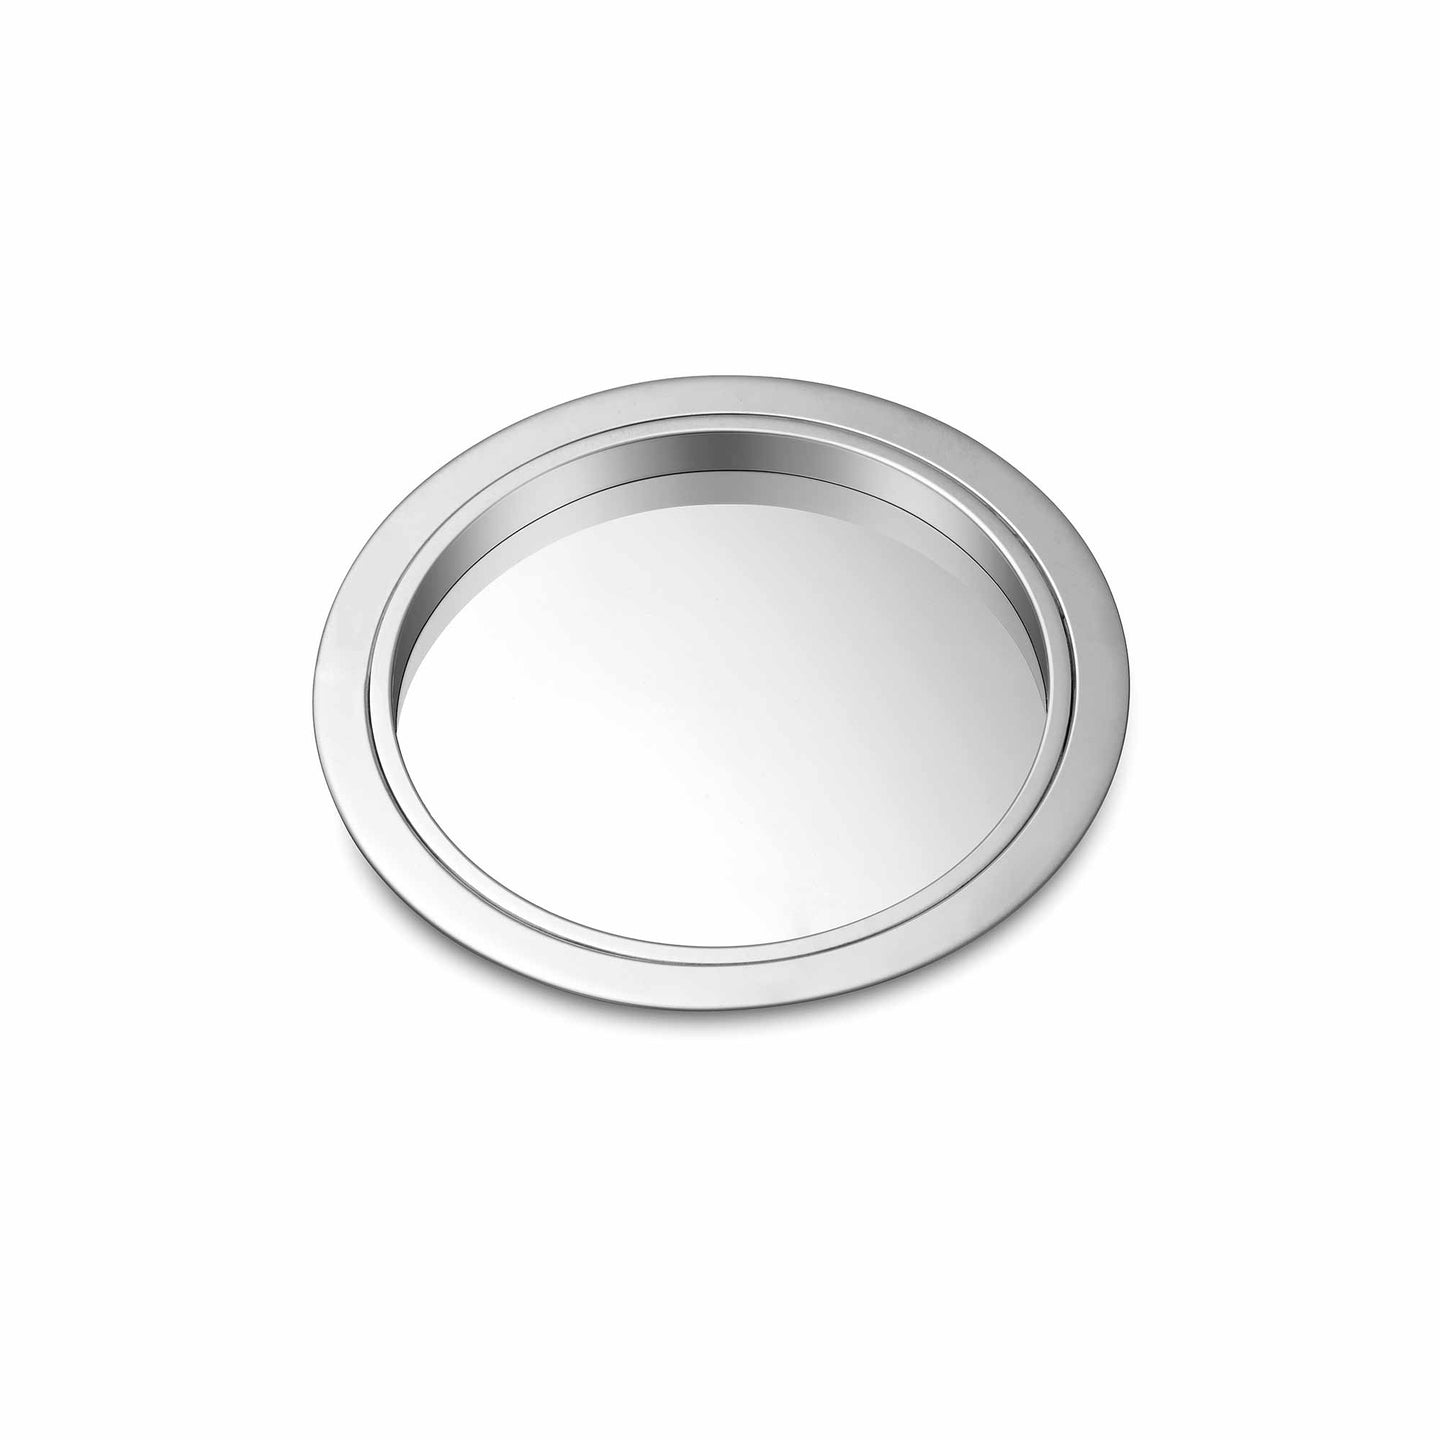 Small Pocket Makeup Mirror in Sterling Silver